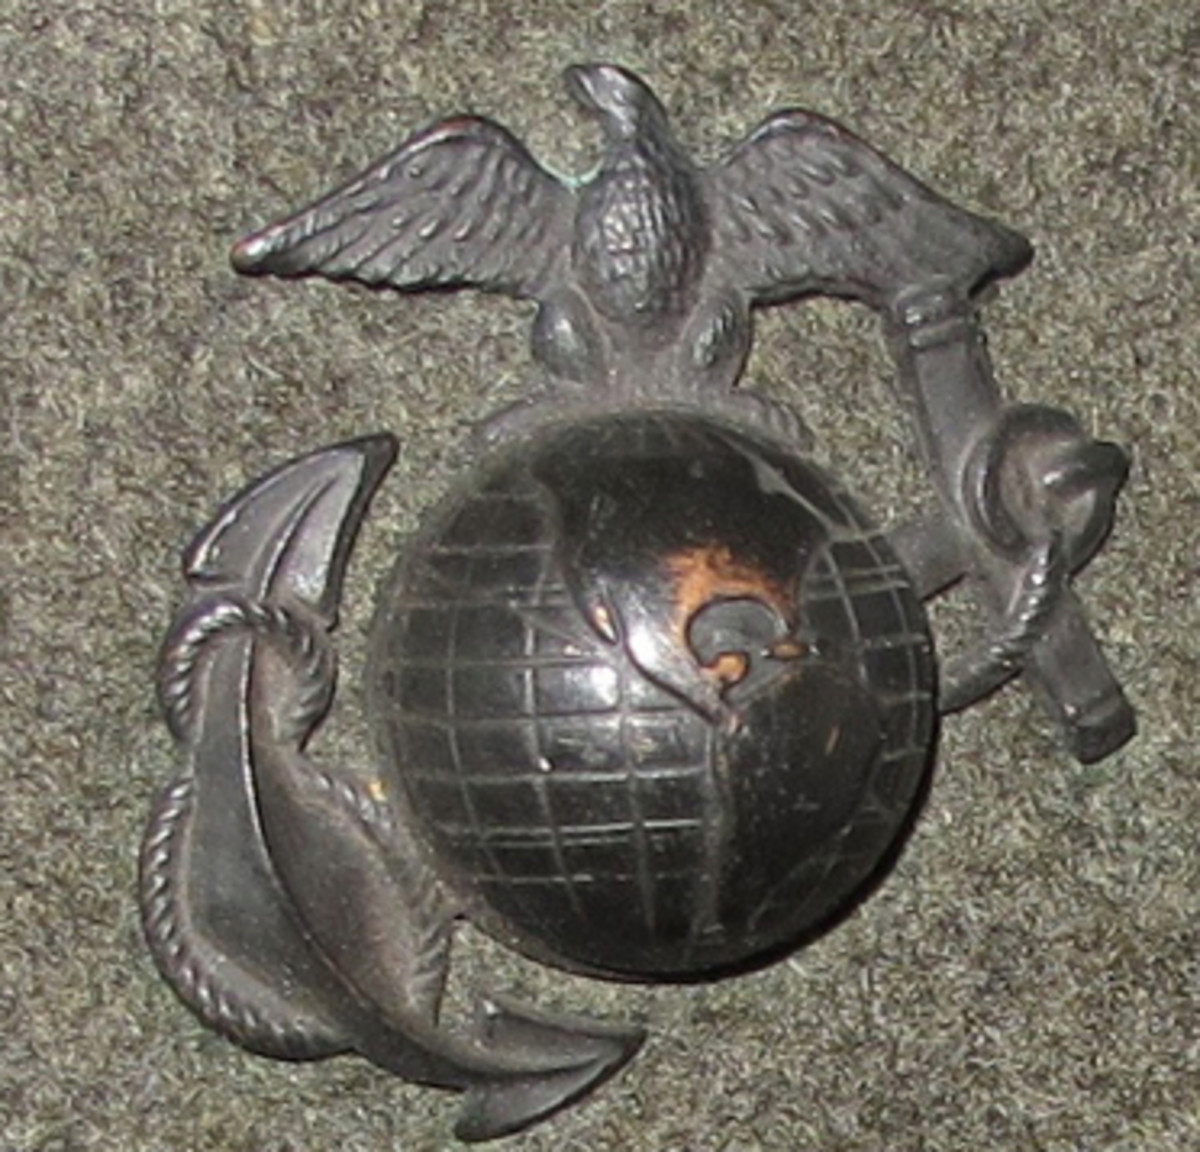 Enlisted pattern eagle, globe, and anchor insignia as authorized for wear on the hat.